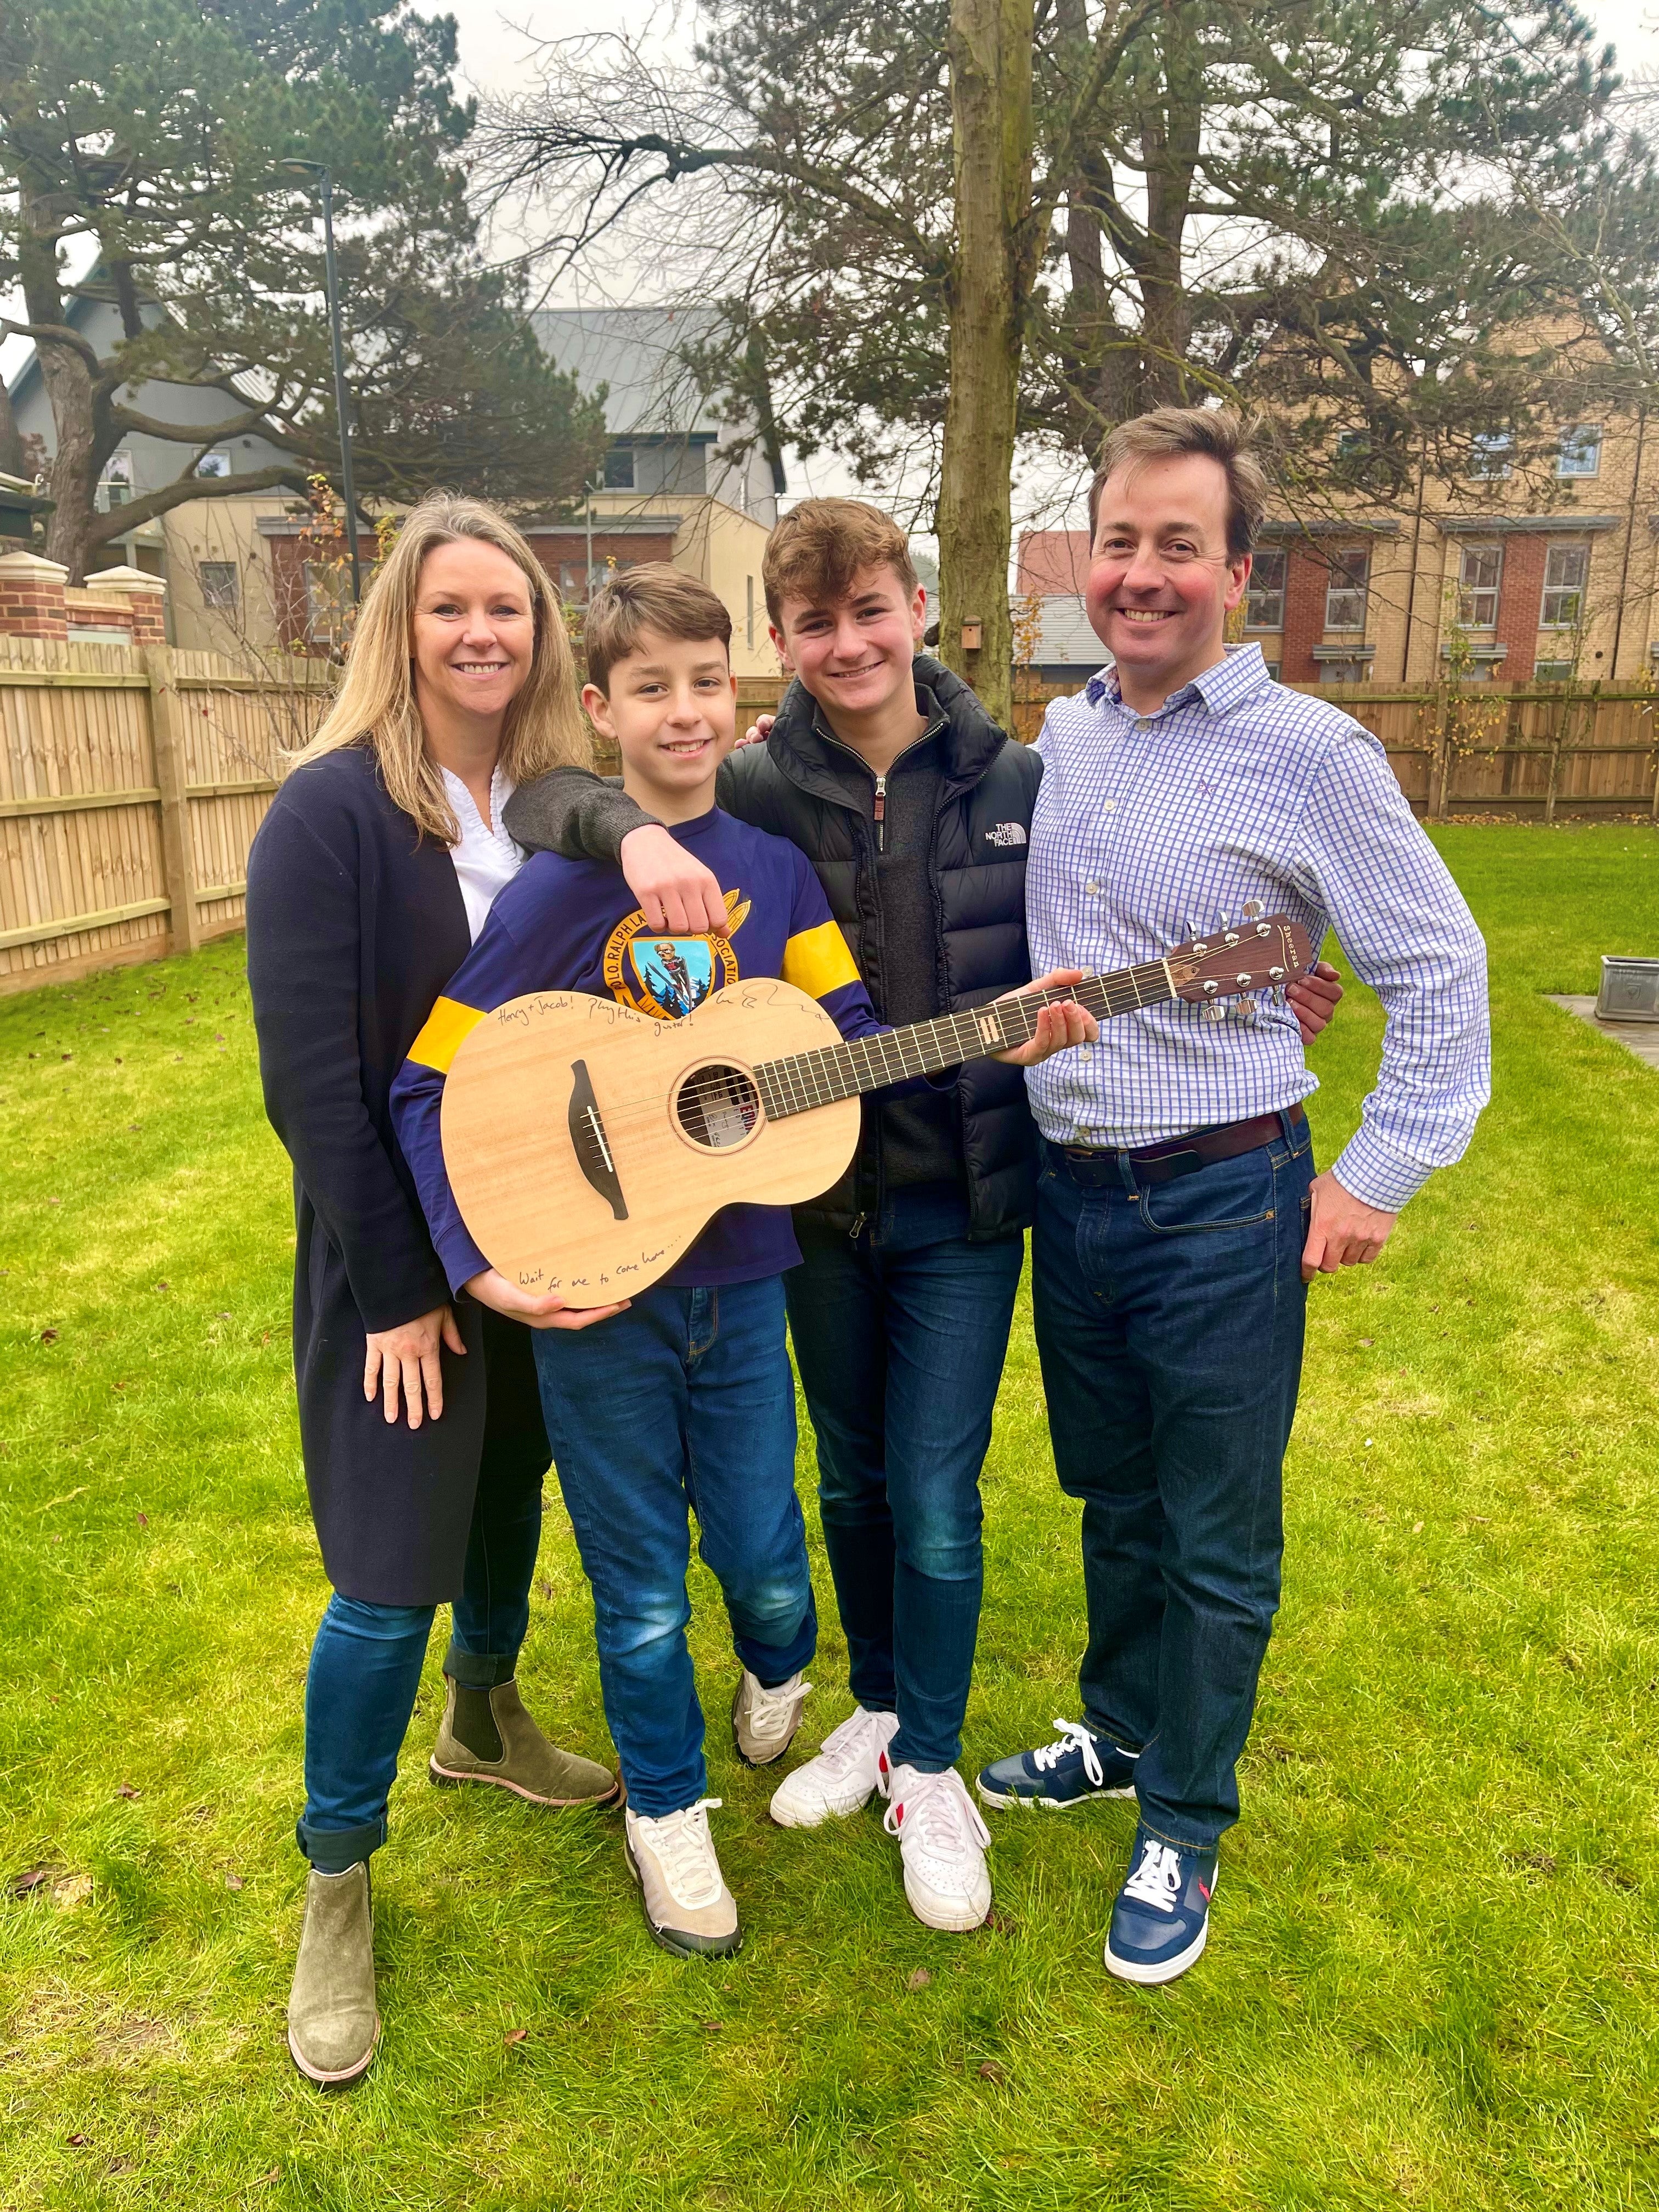 Hospital worker Kellie Myers and her family with Ed Sheeran’s prototype guitar, that they won through a charity raffle. (GeeWizz/ PA)